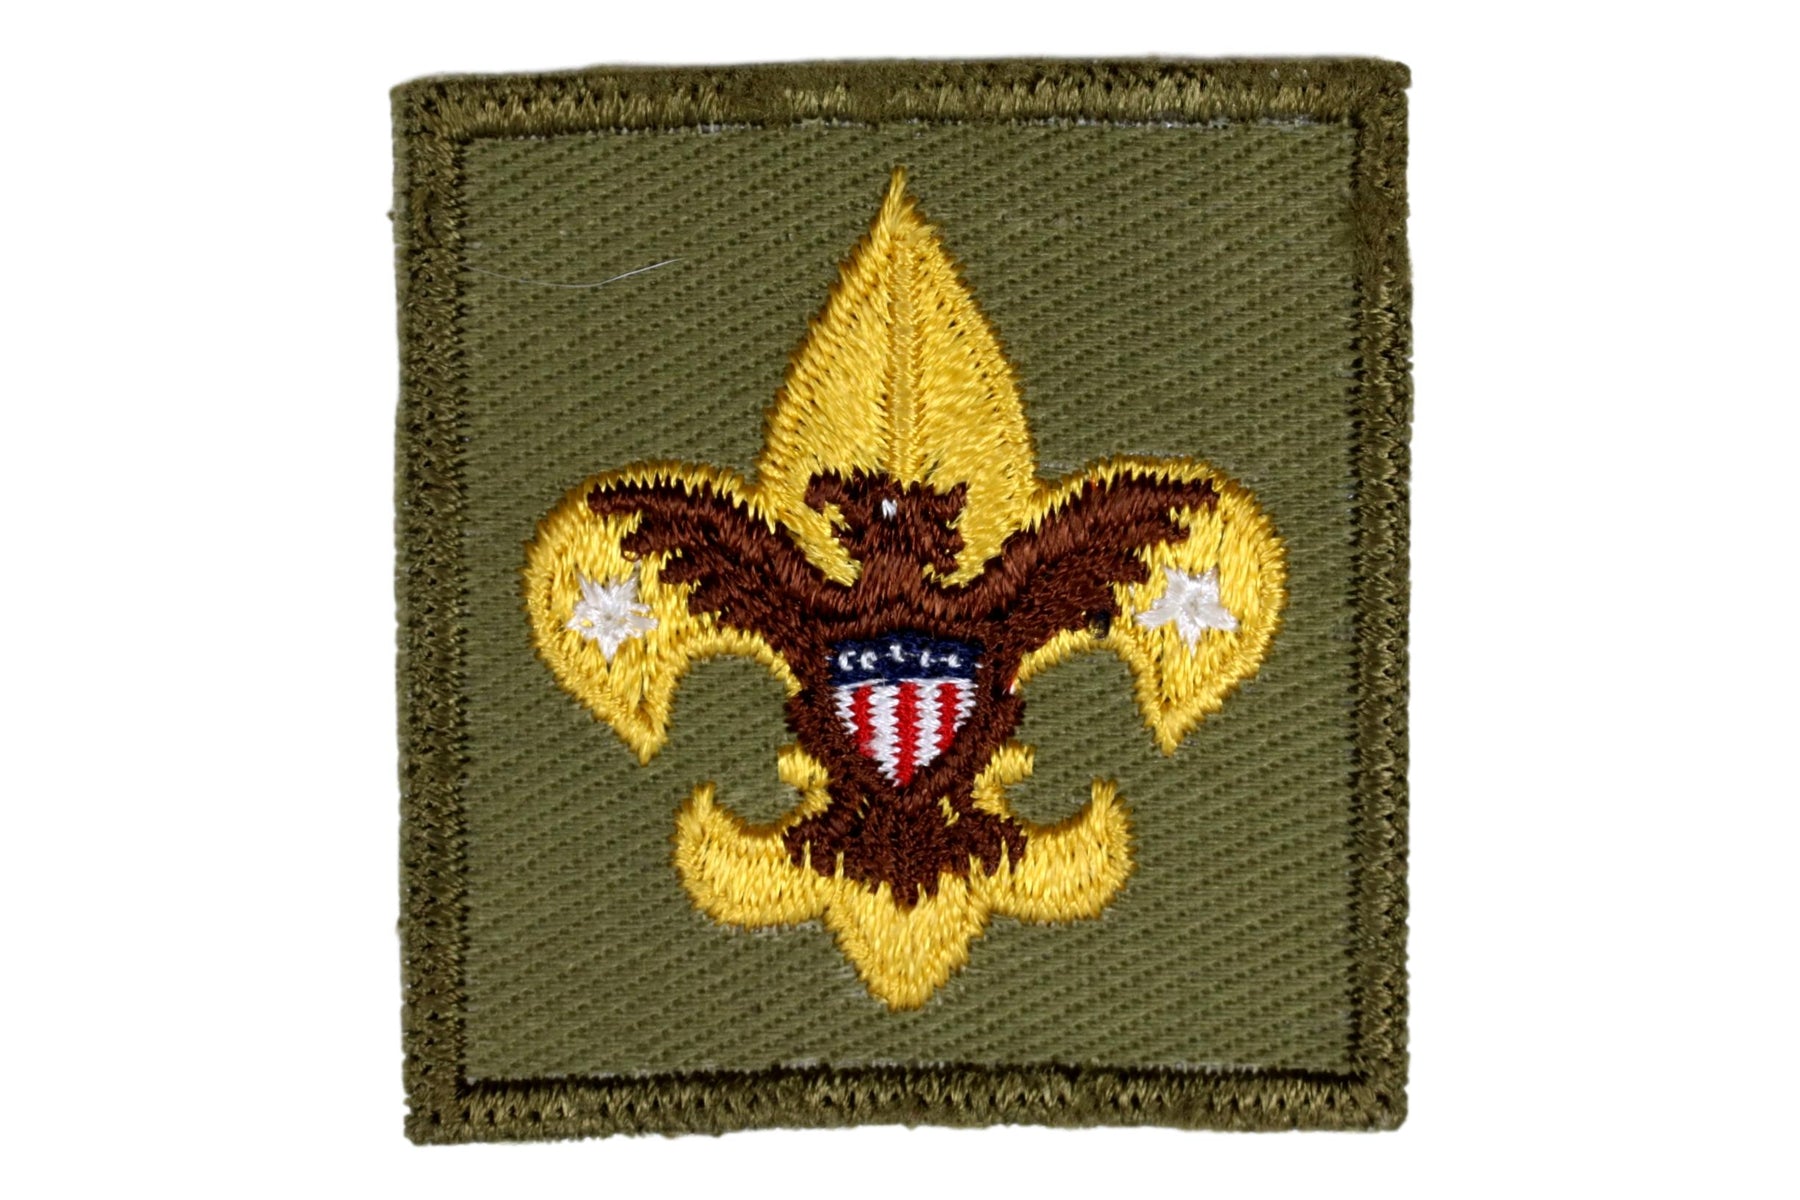 Tenderfoot Rank Patch 1960s Type 7B Rough Twill Gauze Back